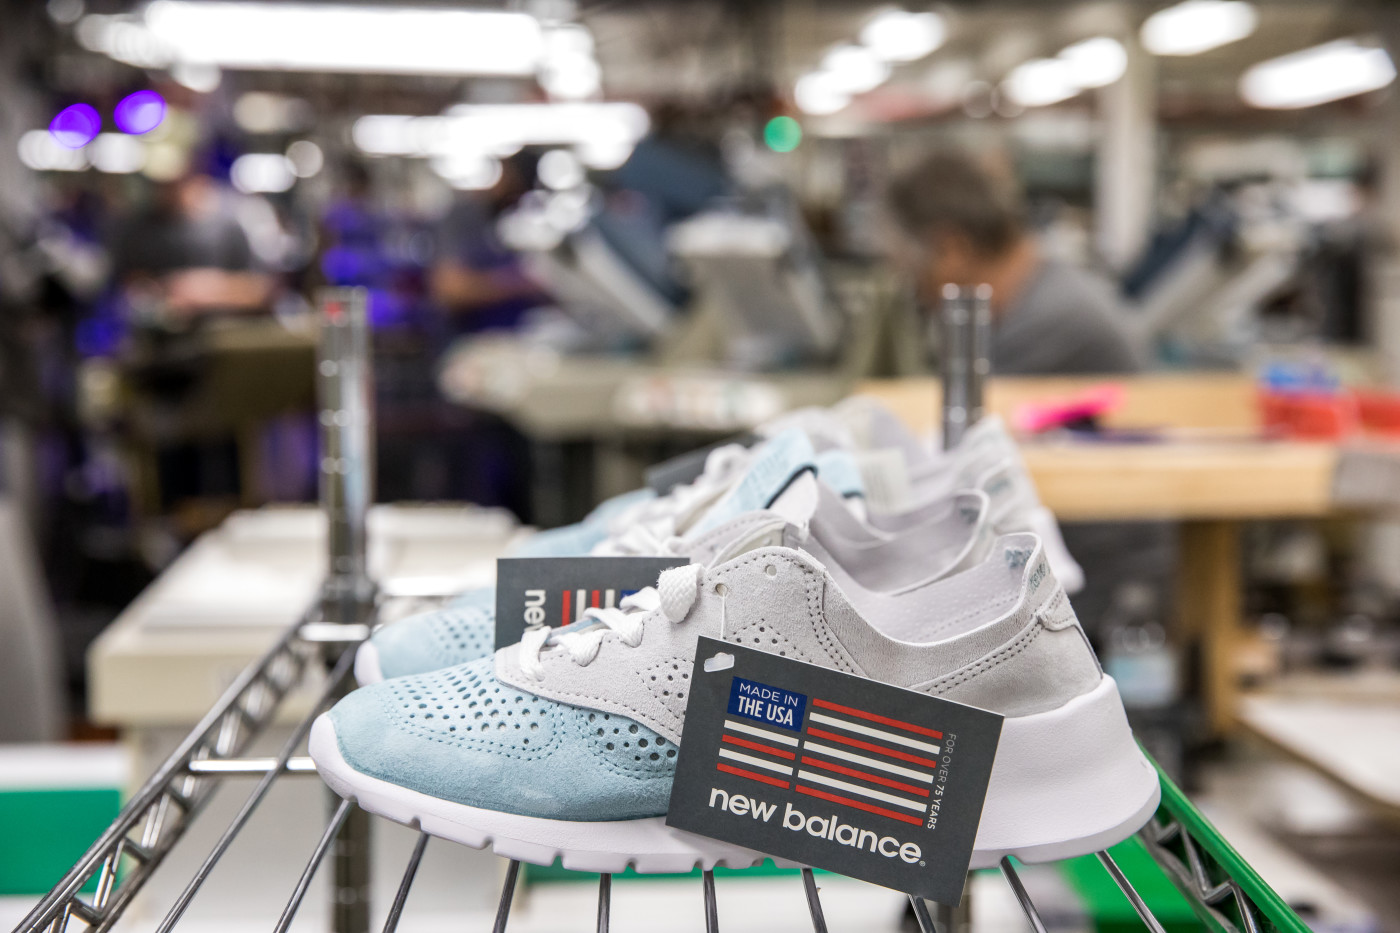 new balance shoes made in america